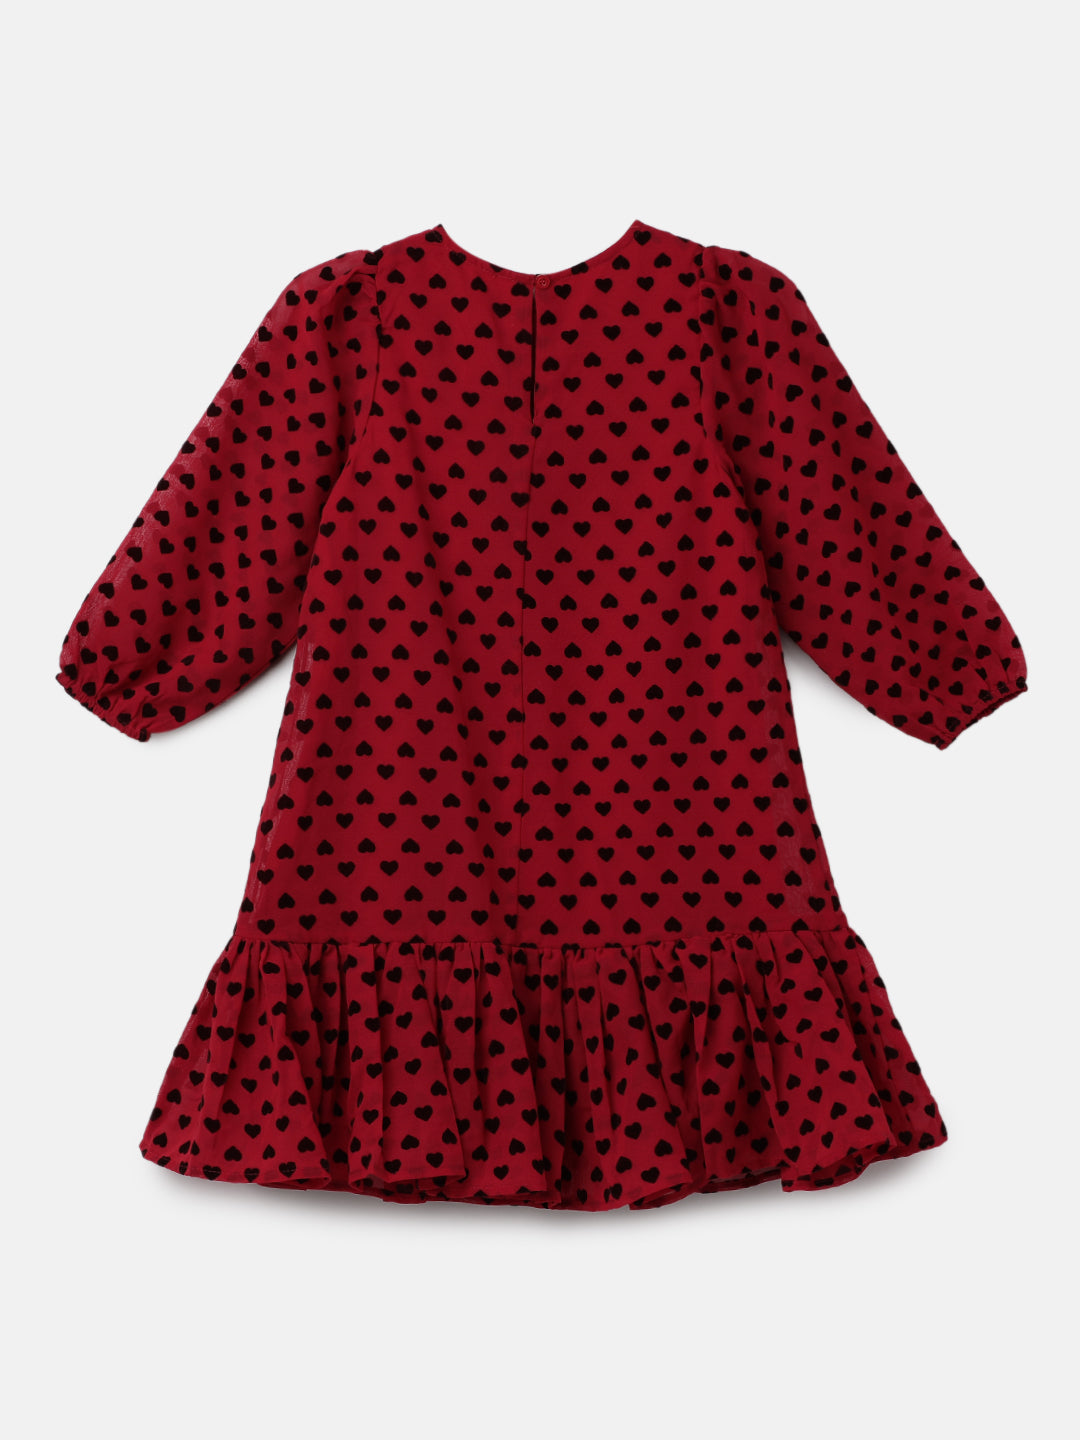 Girls Heart Printed Casual Red Dress